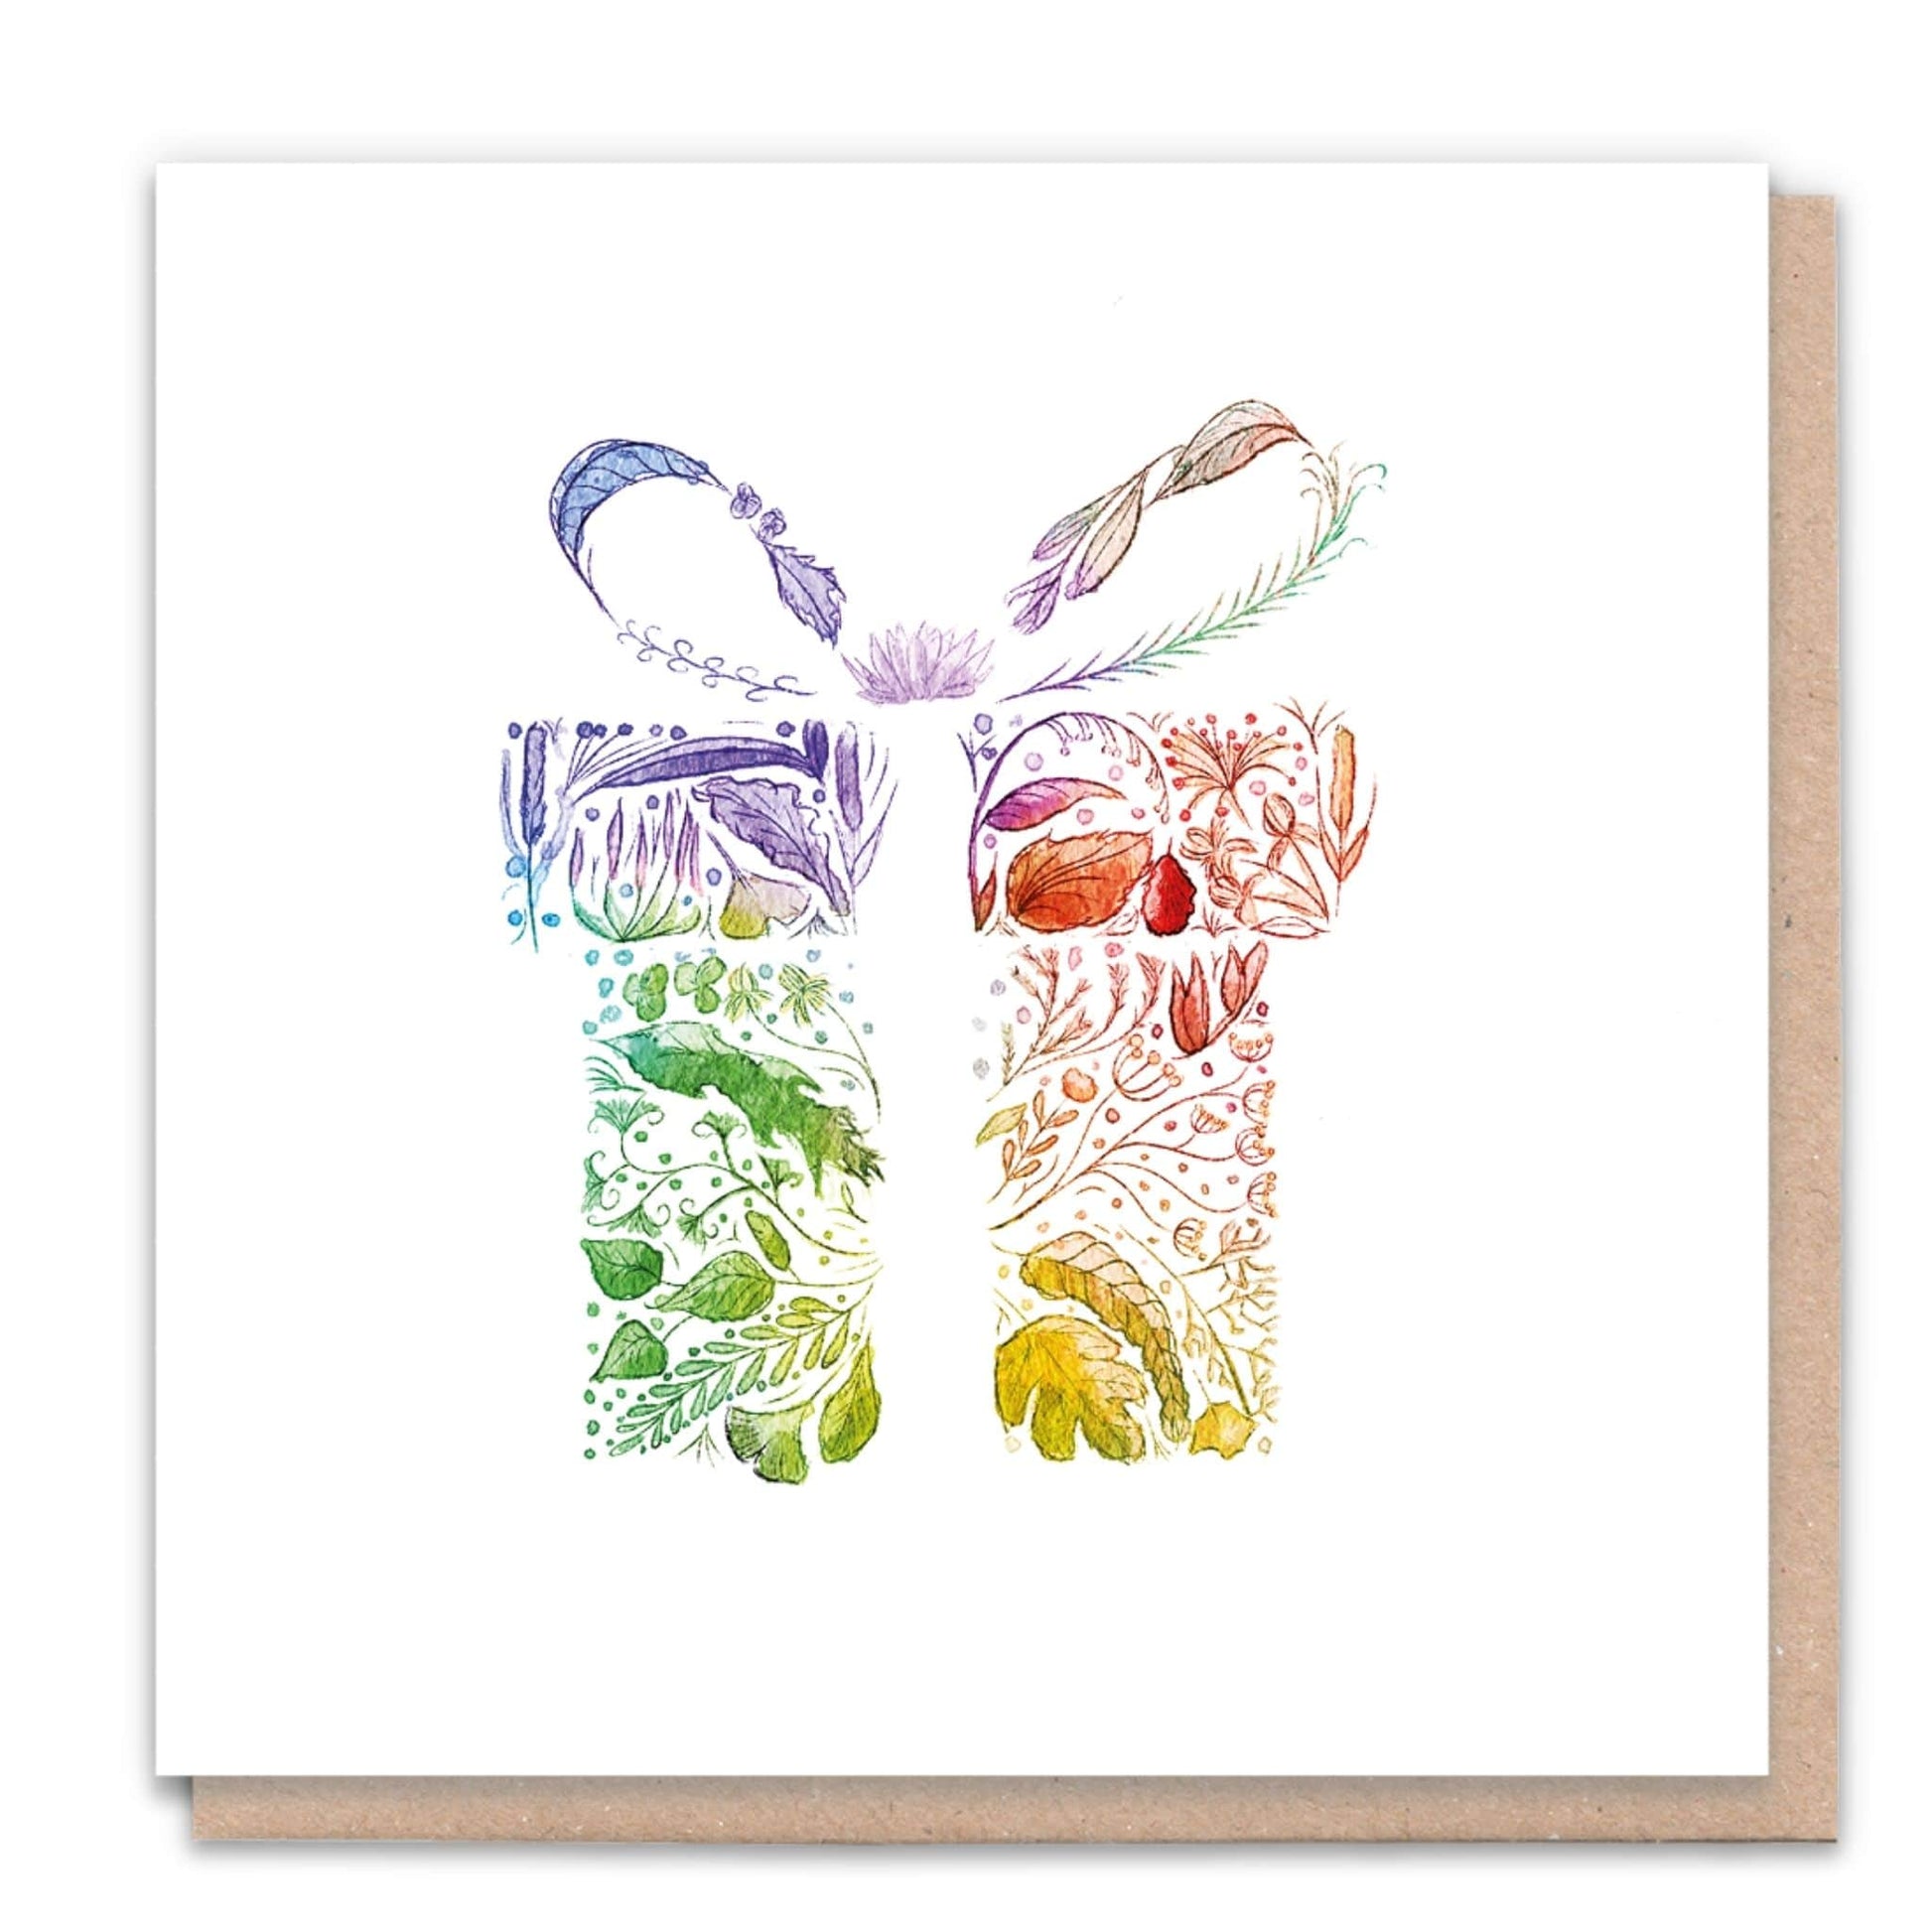 Rainbow Gift - Recycled Blank Card + Tree from 1 Tree Cards